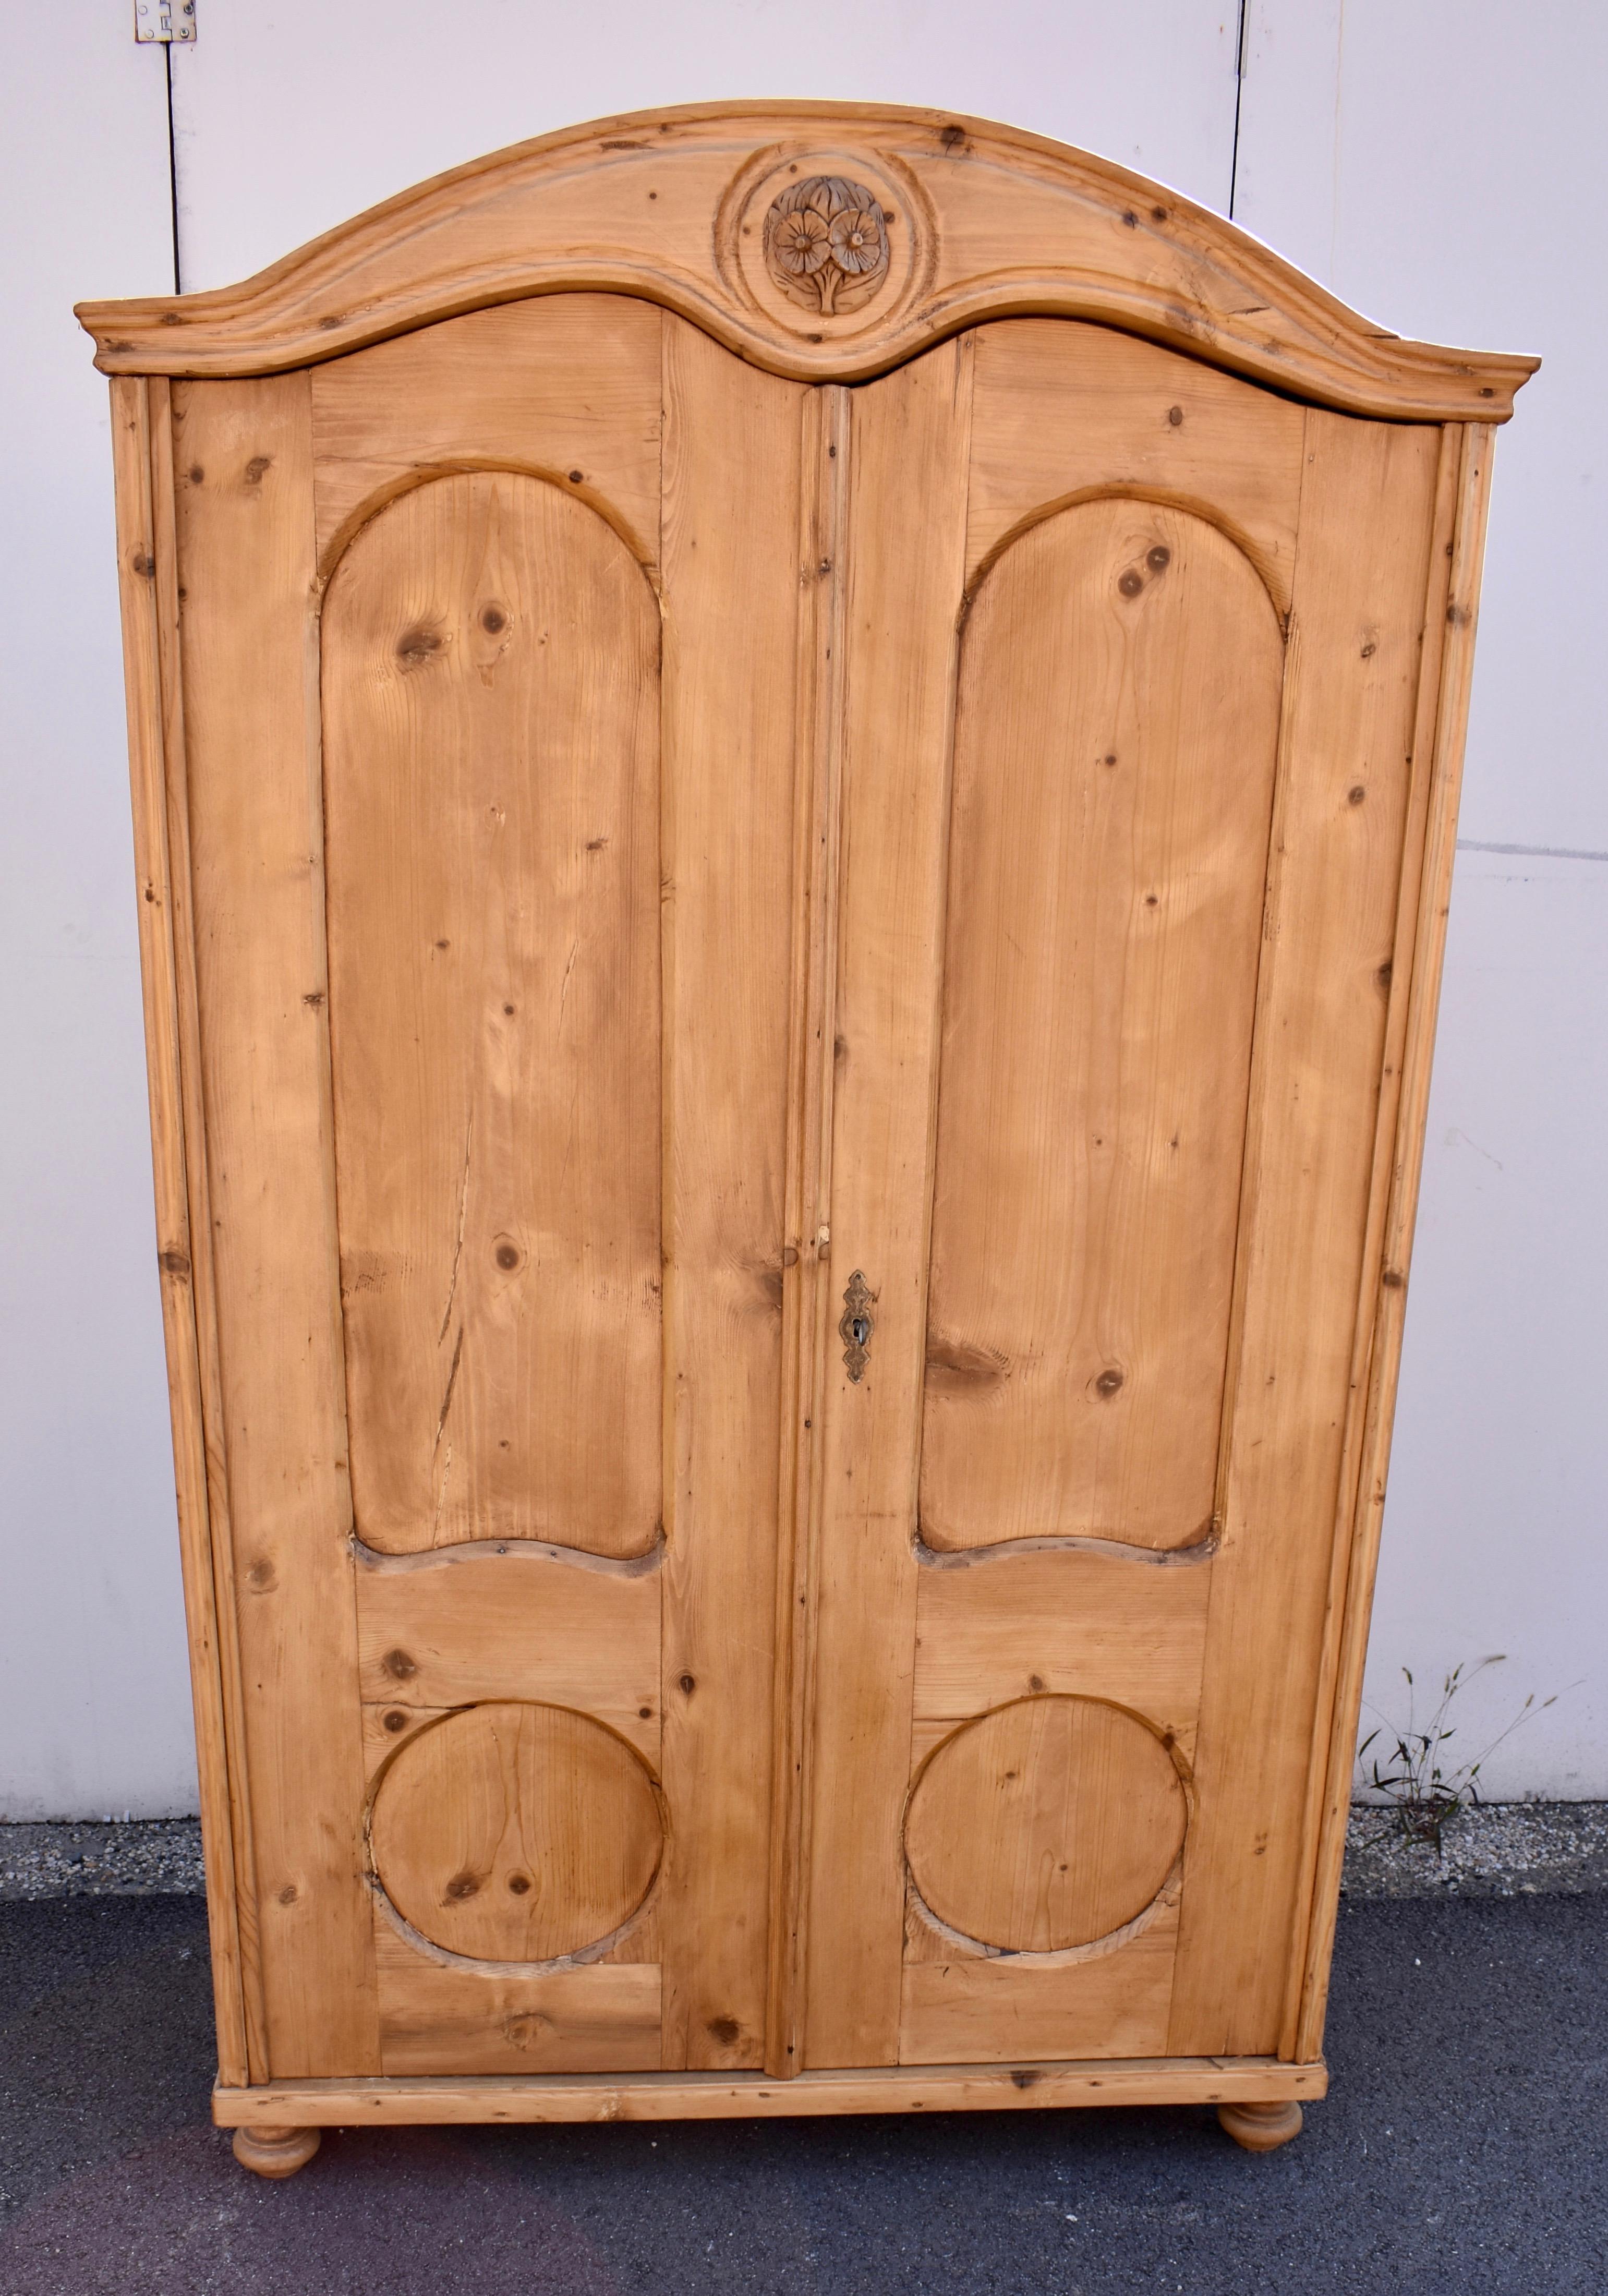 This is an interesting two door armoire with a very attractive form.  It is very similar to another listed here.  The bonnet-top crown has a wonderful “swooping” line on top with a Queen Anne style double arch beneath.  In the center of the crown is